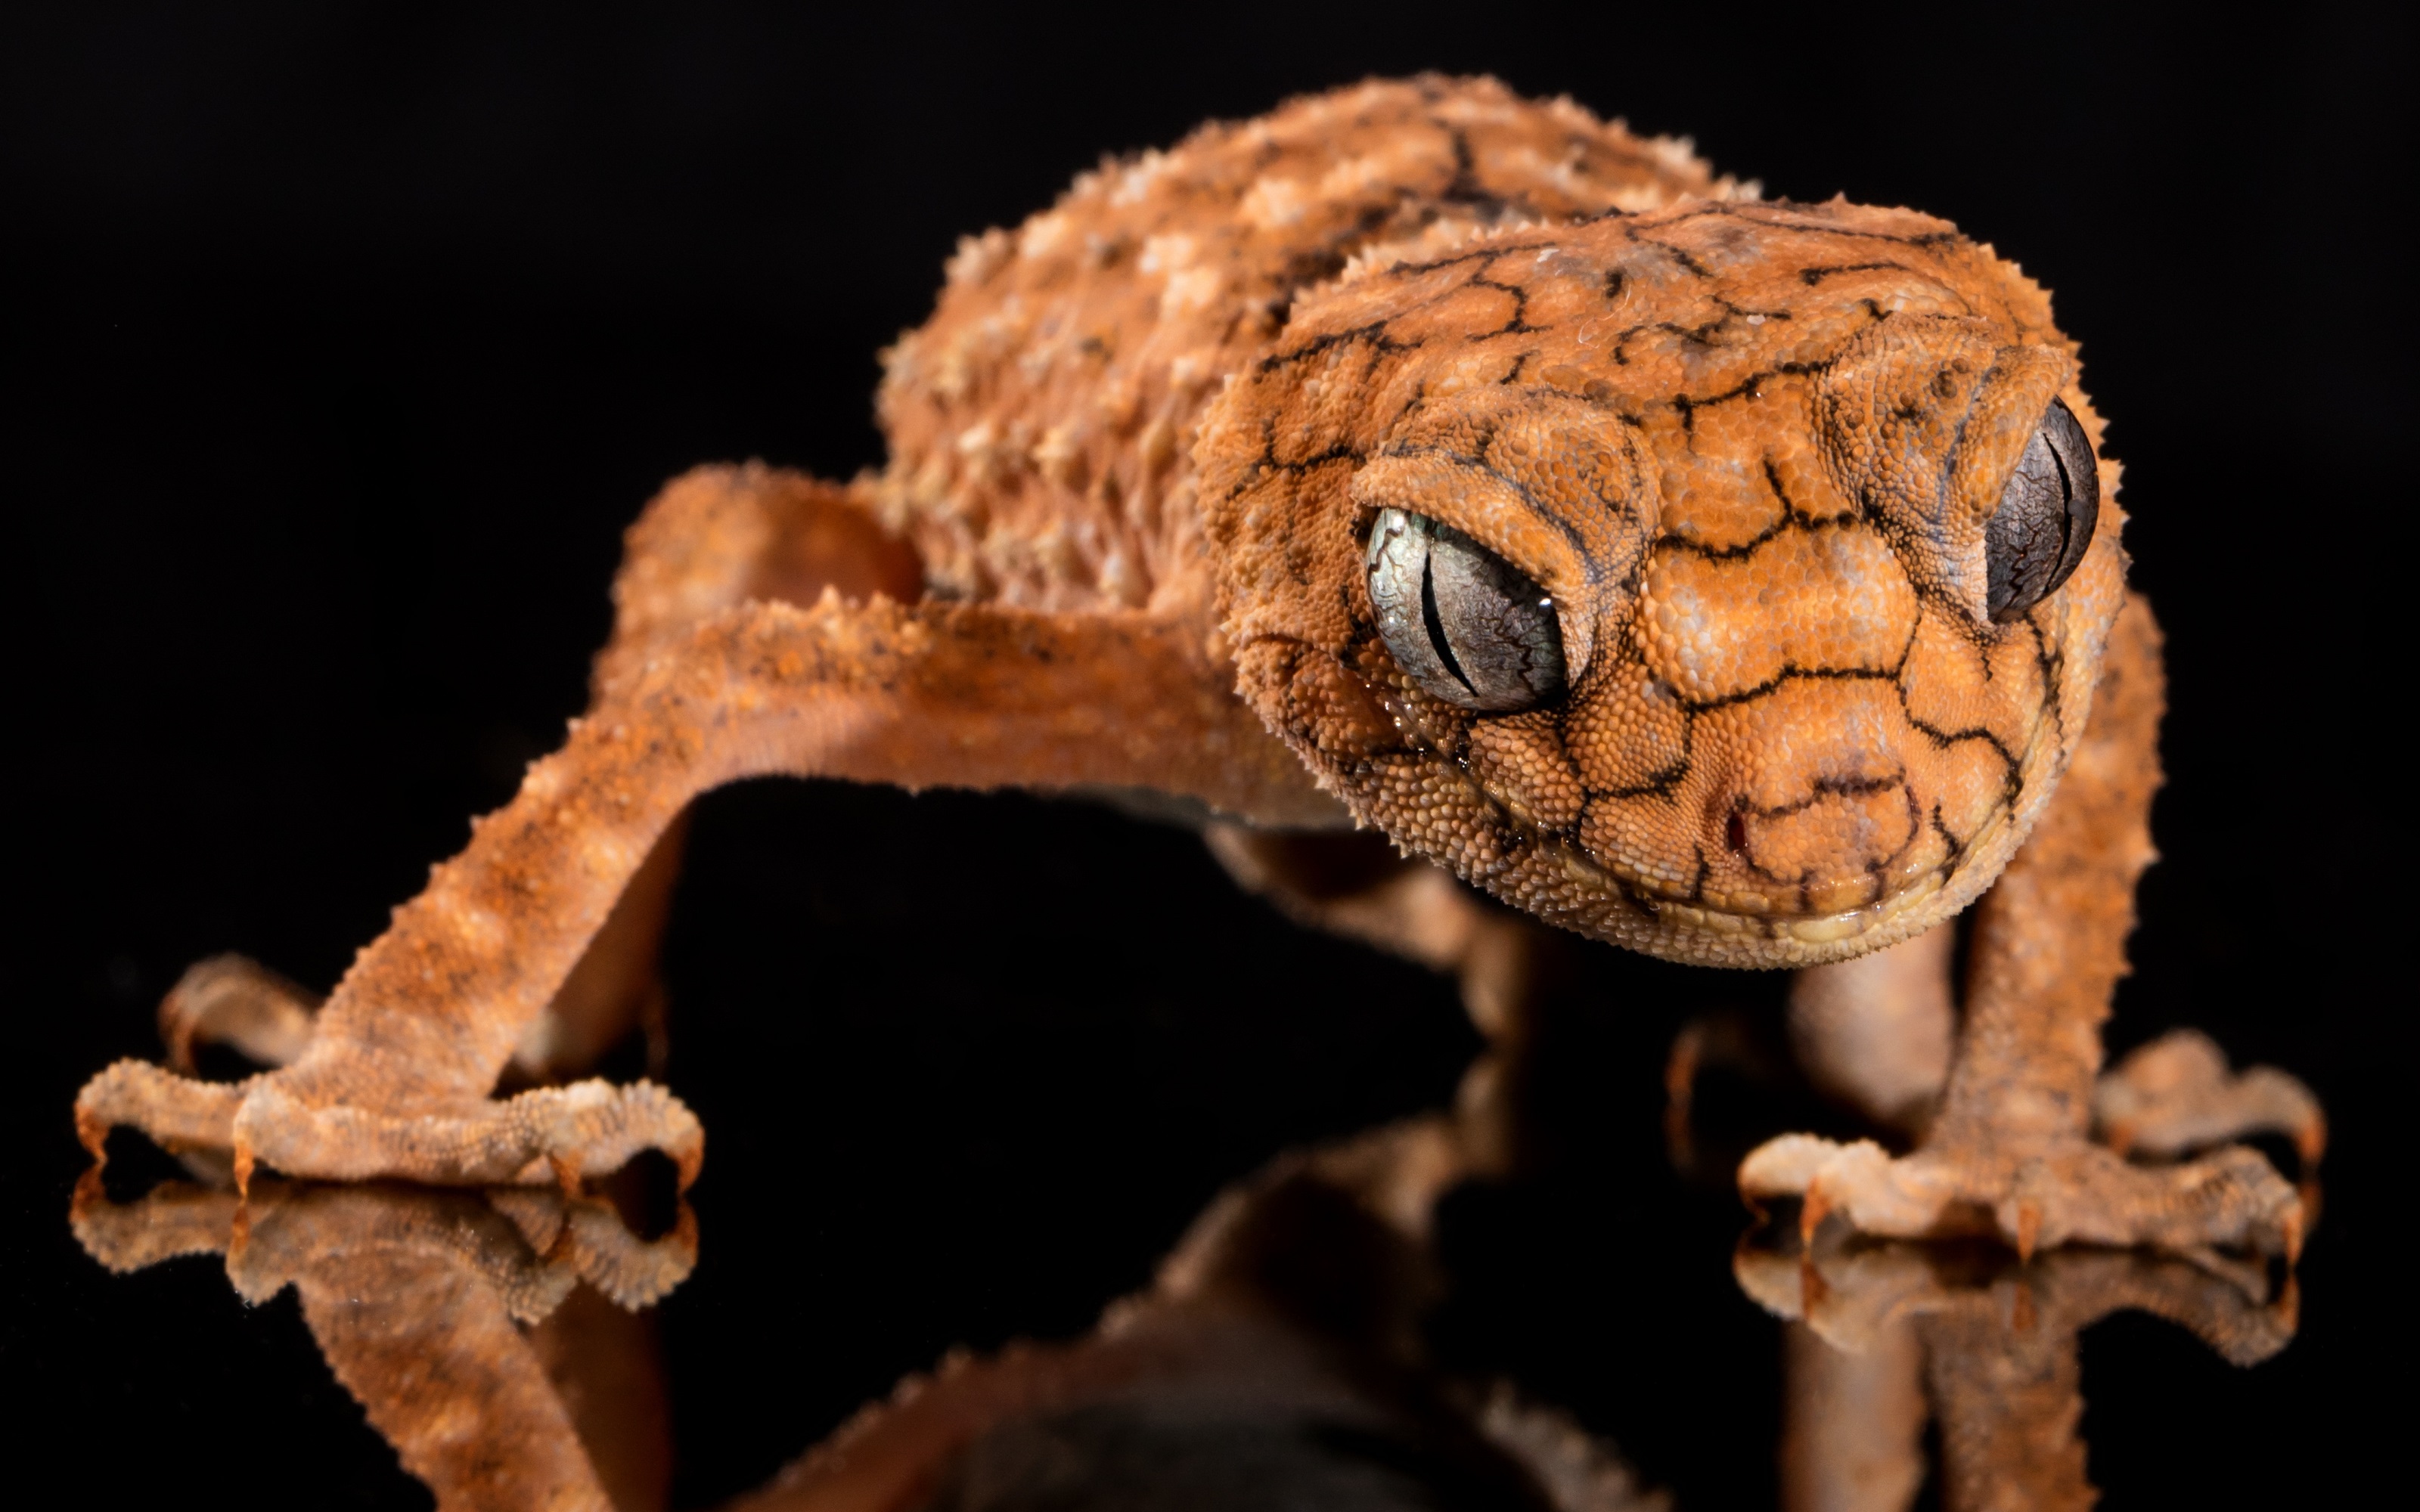 Knob-tailed gecko by Cleverpix